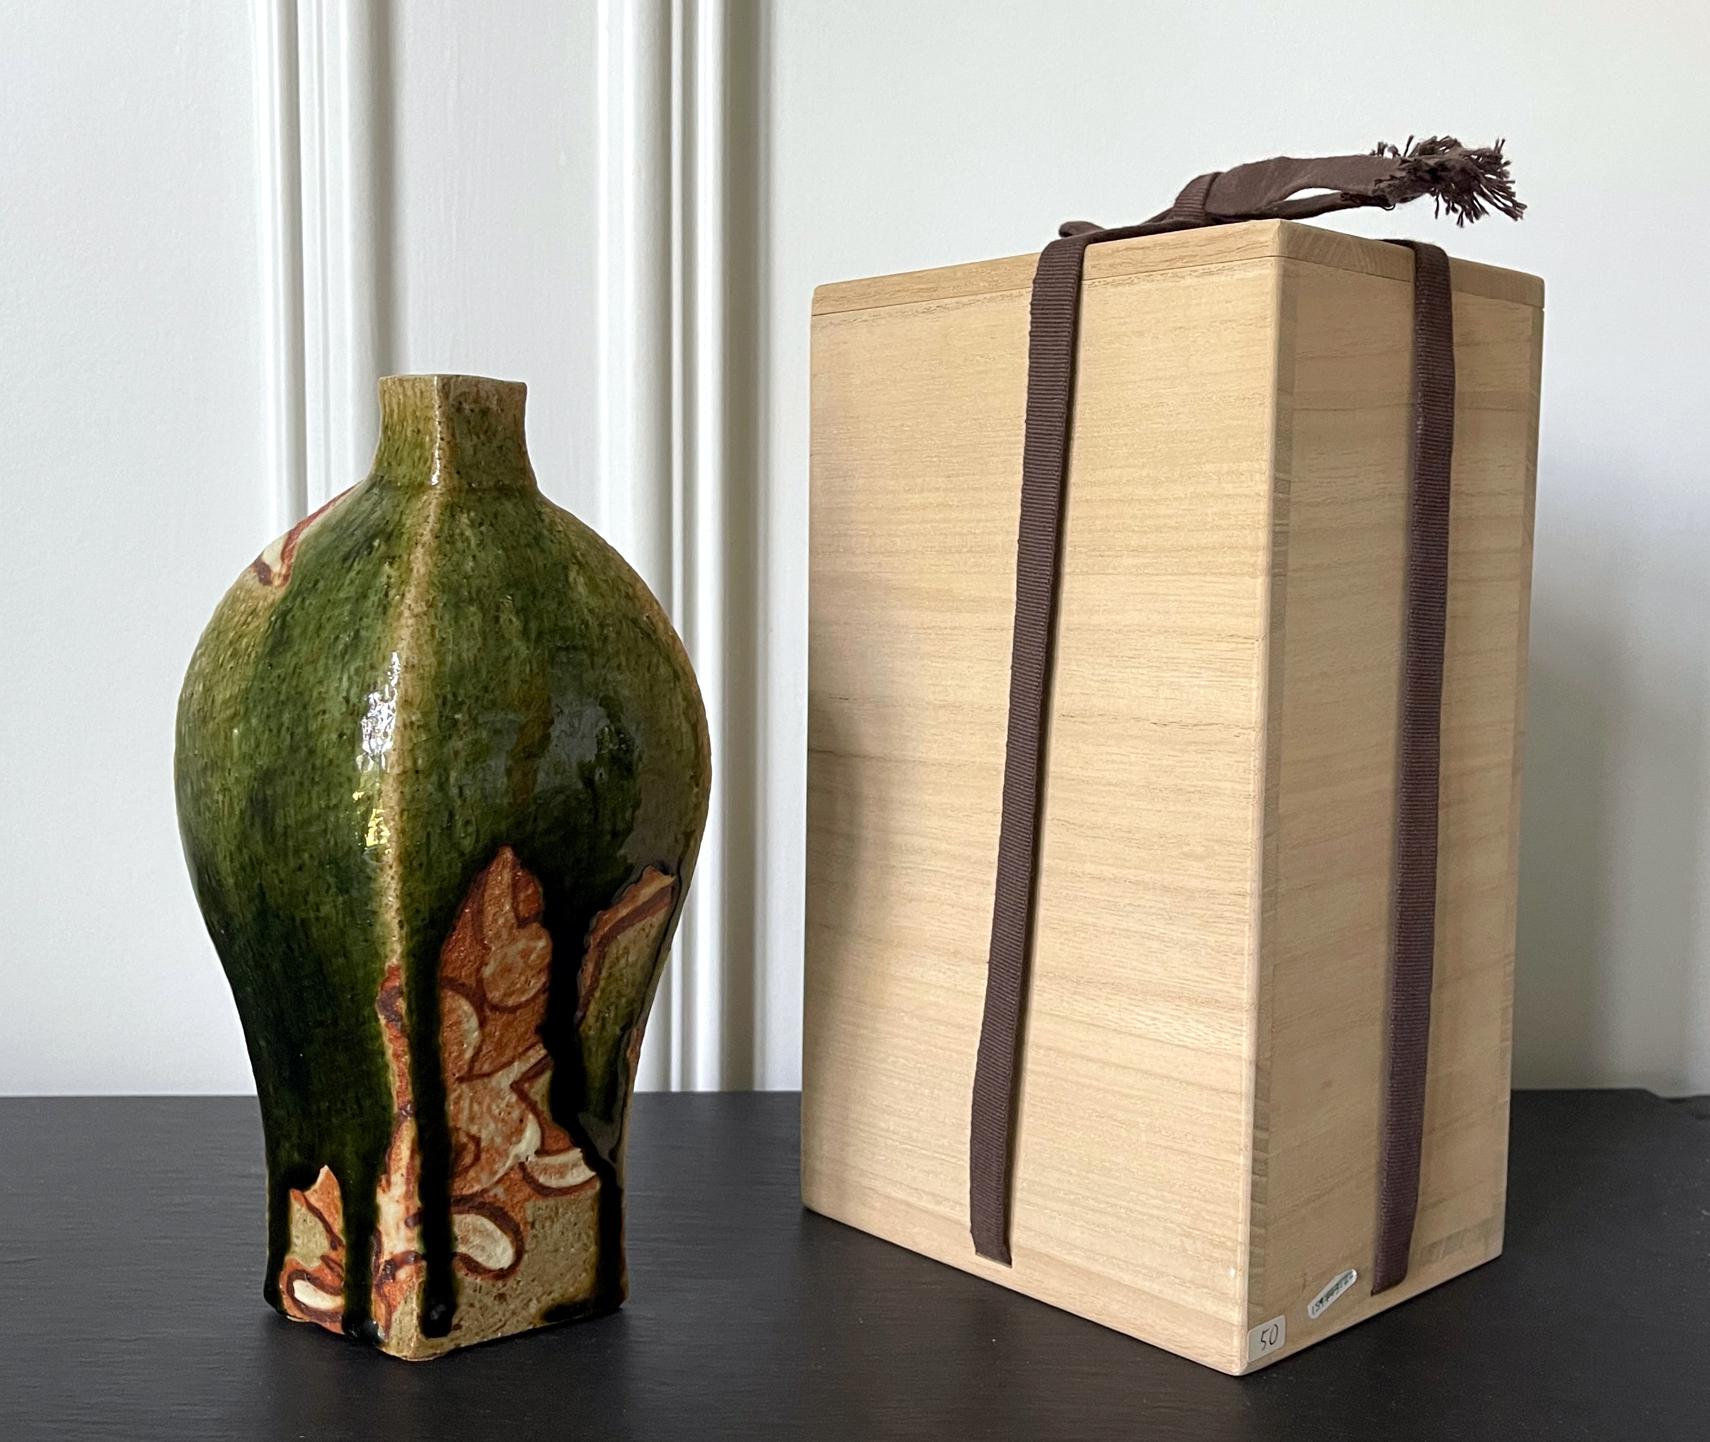 A contemporary studio ceramic vase made by Japanese potter Ken Matsuzaki (1950-). The vase showcases a geometrical spindle form, rather distinguishingly modern. It is covered with a thick dripping Oribe green glaze partially revealing the unglazed